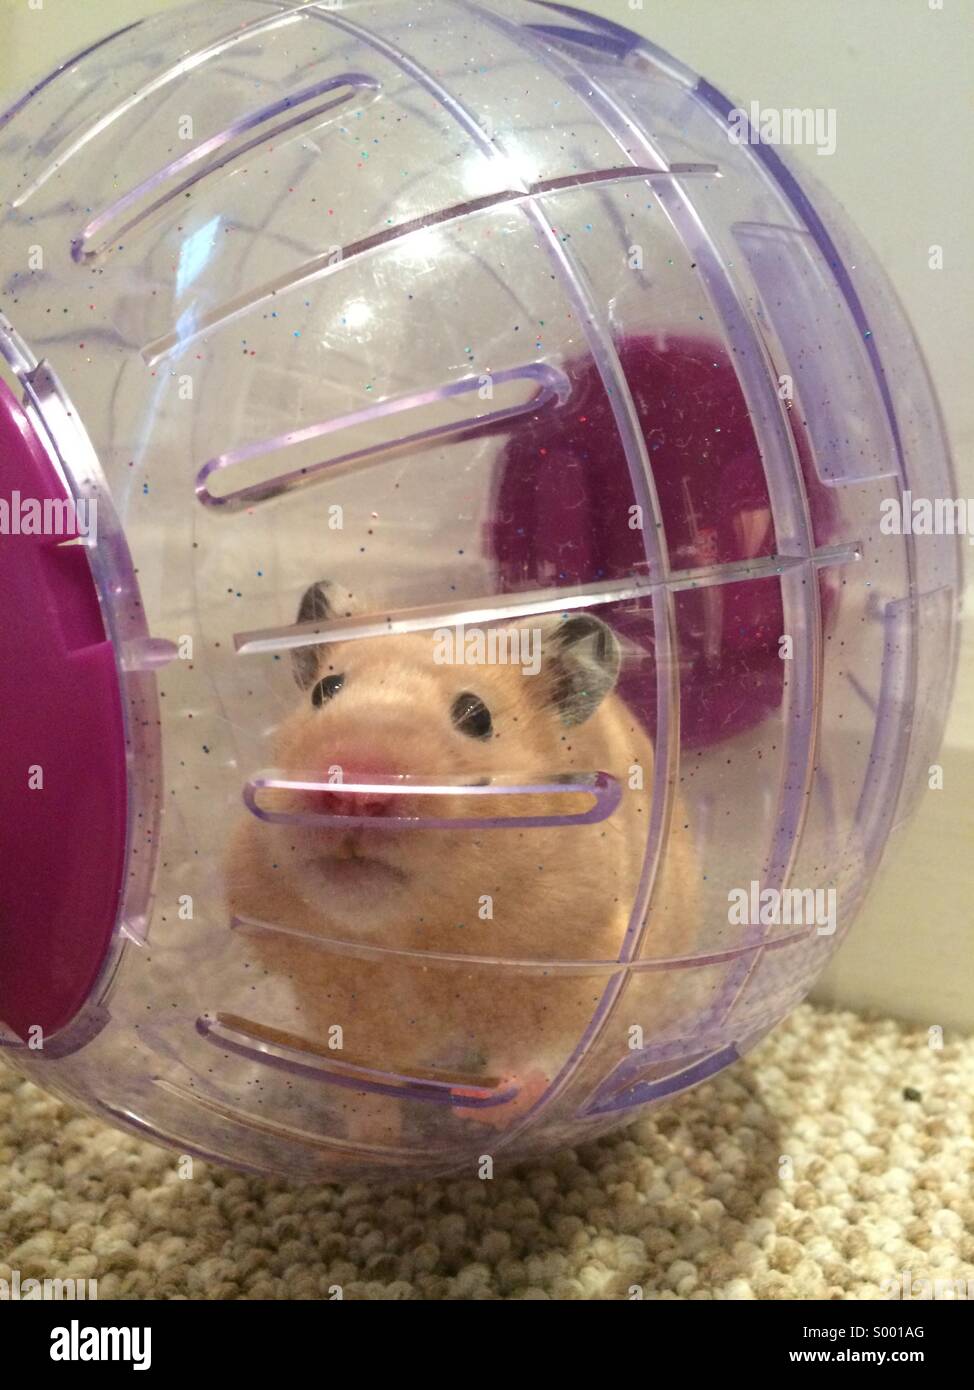 Hamster exercising in a ball Stock Photo - Alamy